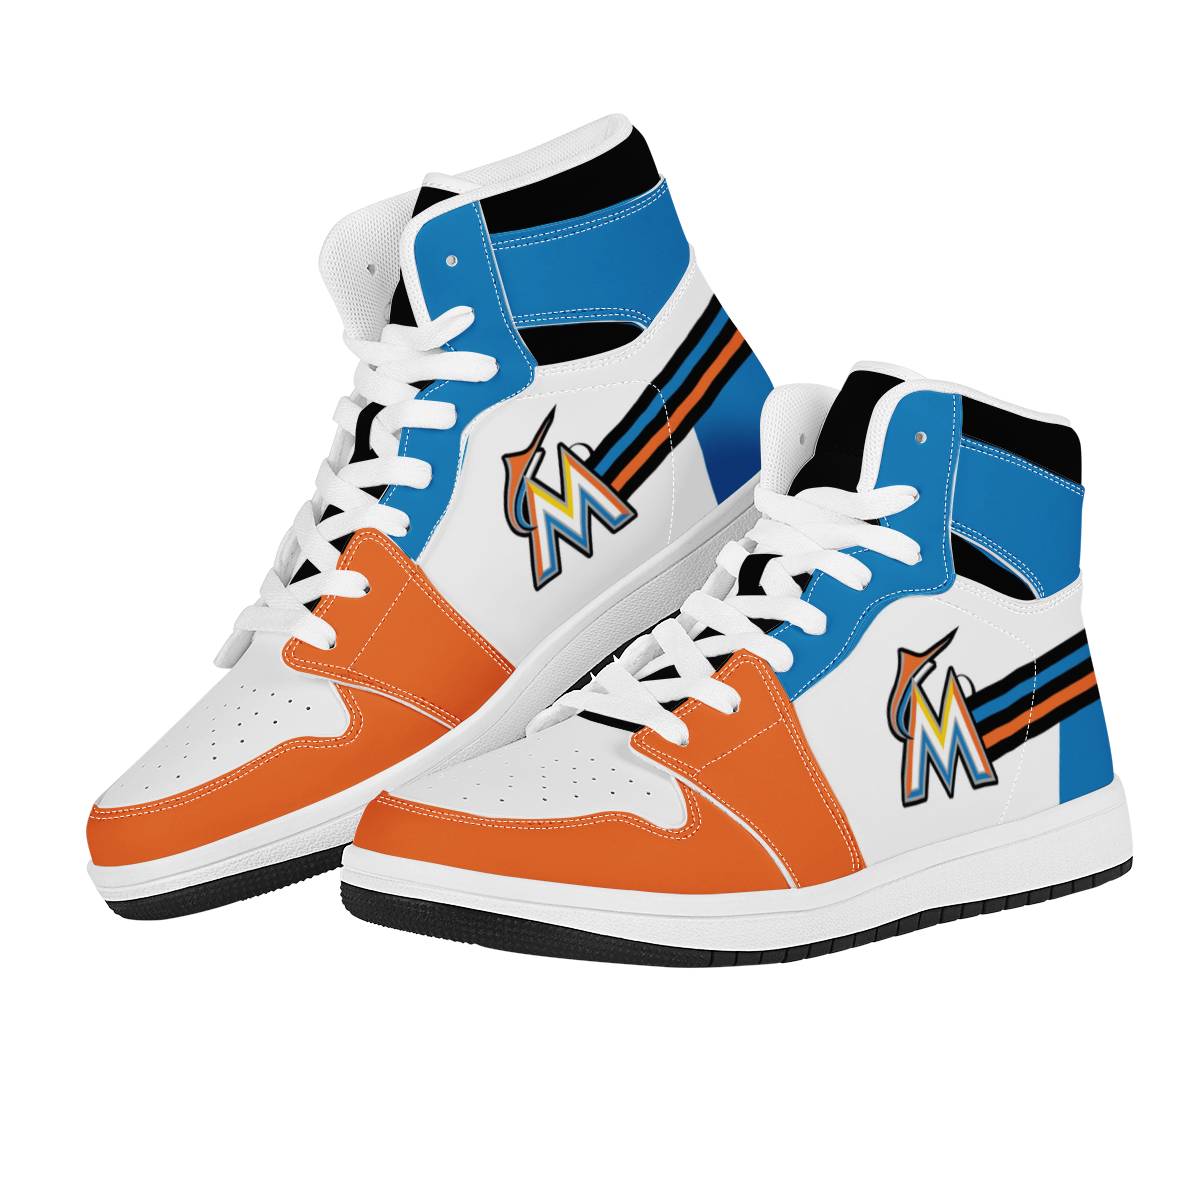 Women's Miami Marlins High Top Leather AJ1 Sneakers 001